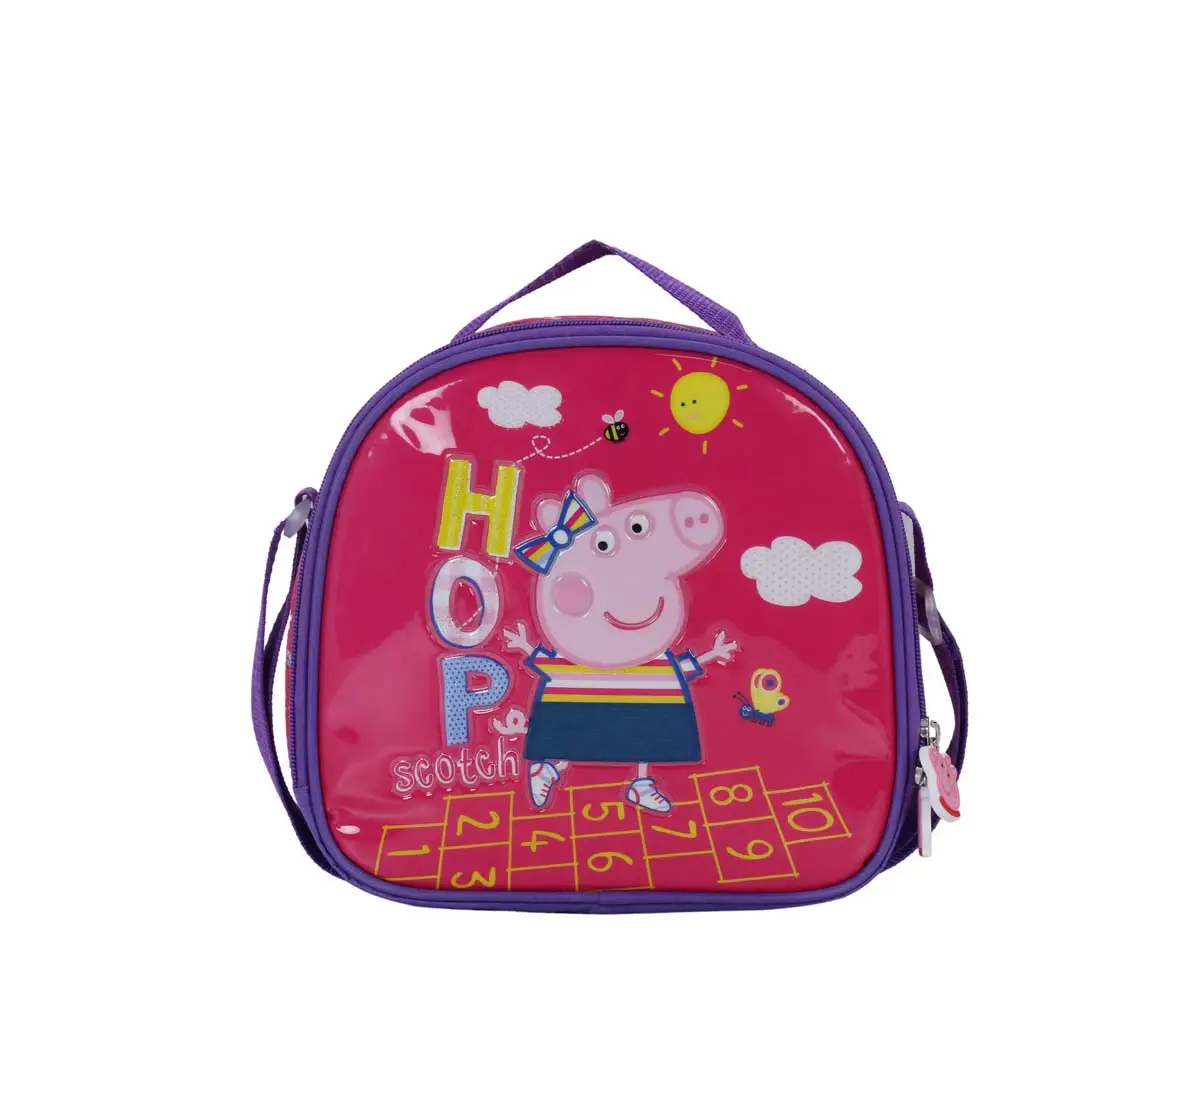 Peppa Pig Hop Scocth Lunch Bags for Kids age 3Y+ 